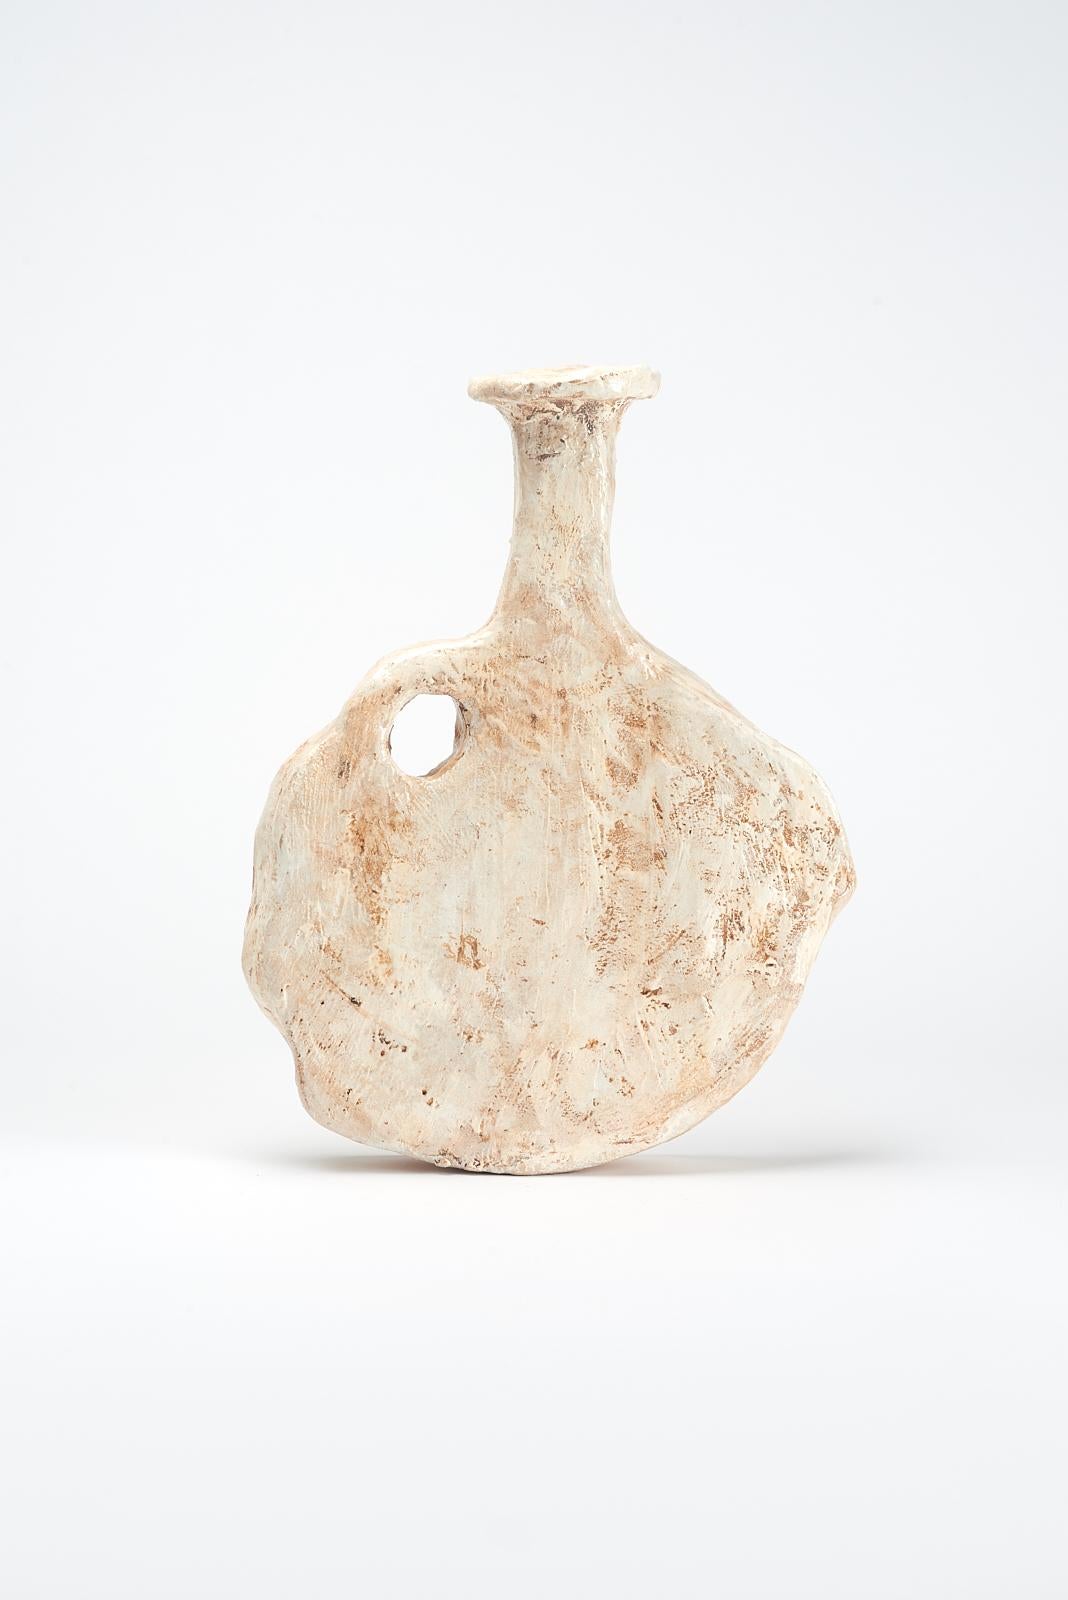 Uso vase by Willem Van Hooff
Dimensions: W 35 x H 24 cm (Dimensions may vary as pieces are hand-made and might present slight variations in sizes)
Materials: Earthenware, ceramic, pigments and glaze

Willem van Hooff is a designer based in